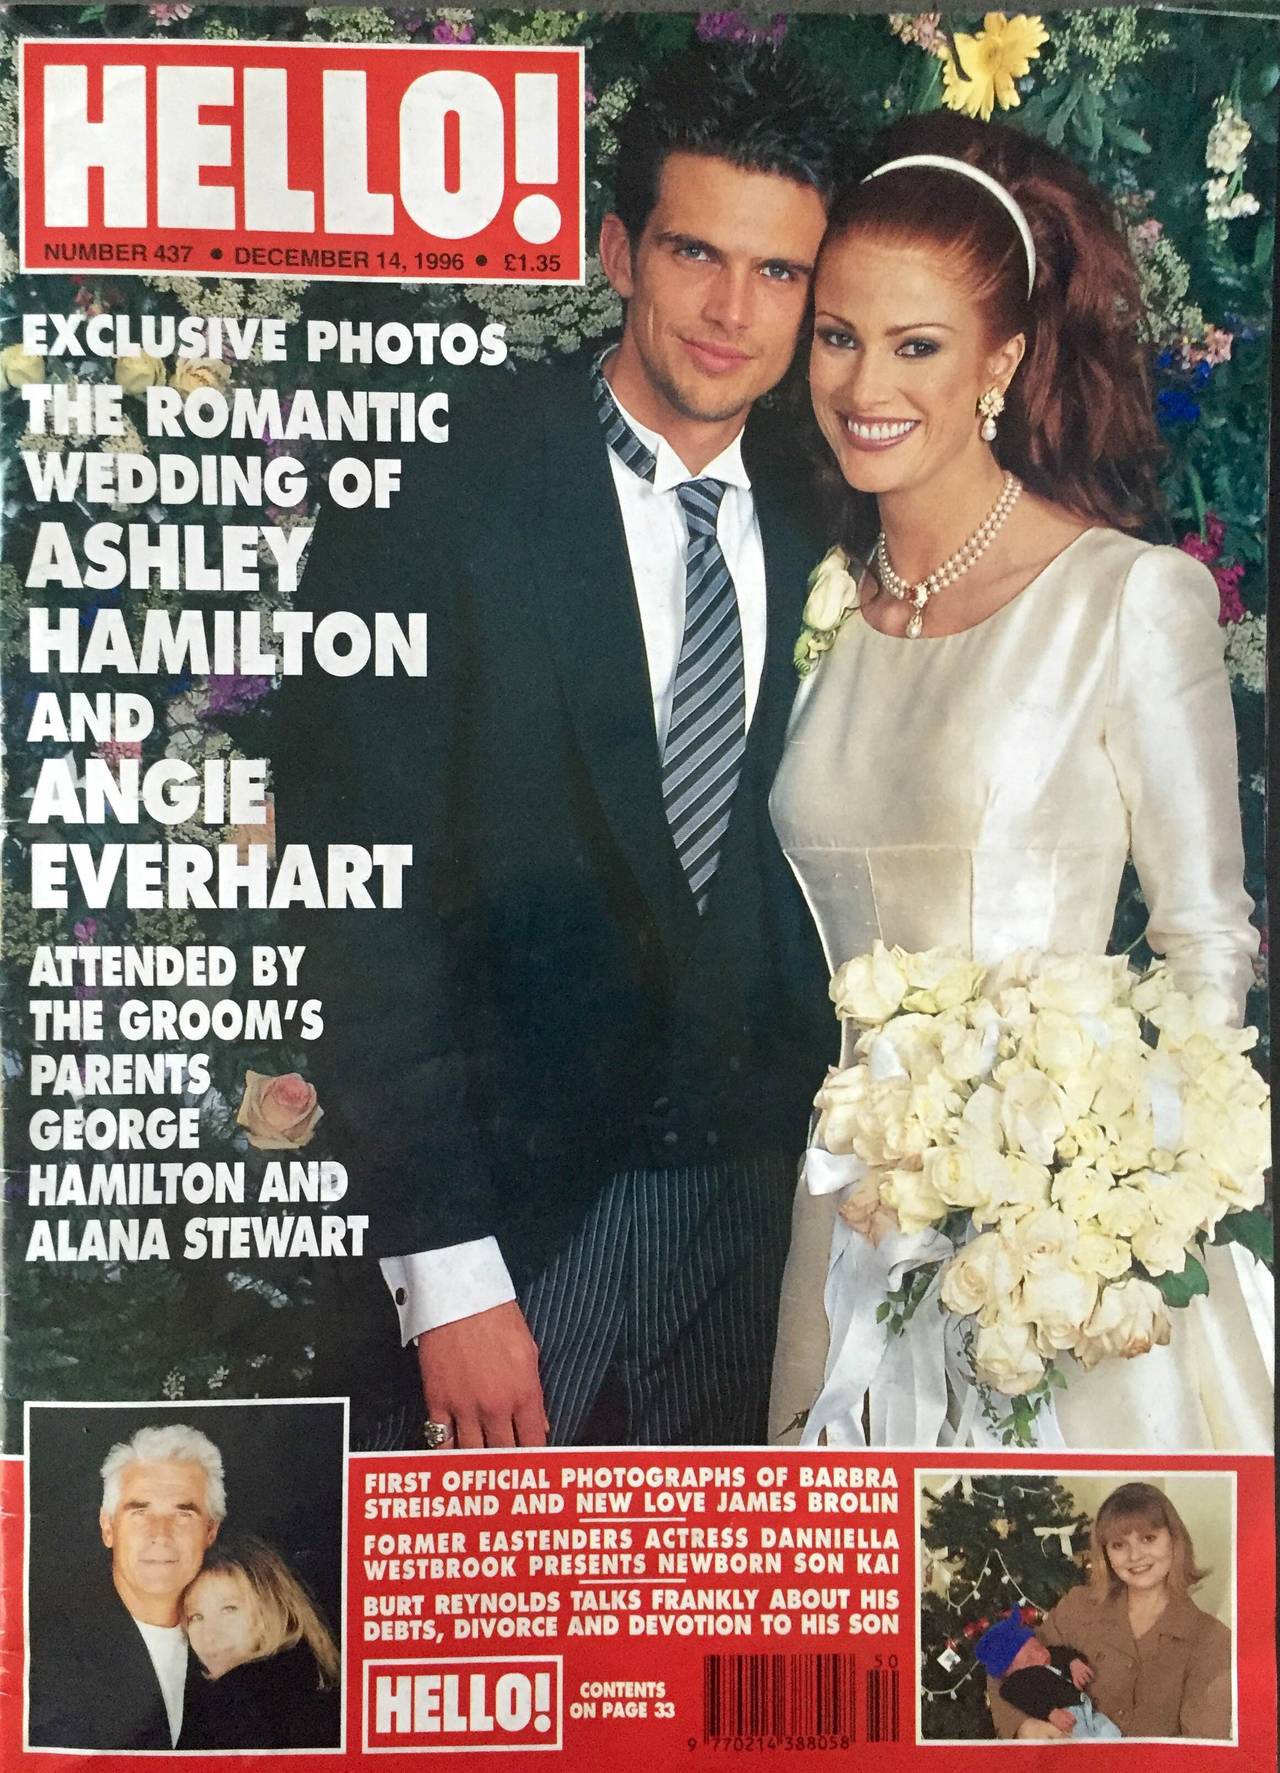 Valentino Haute Couture wedding gown.

Angie Everhart had been a Valentino model in the early 1990s and she commissioned him to create this $70,000.00 spectacular gown for her marriage to Ashley Hamilton. Comes with original sketches. 

The wedding